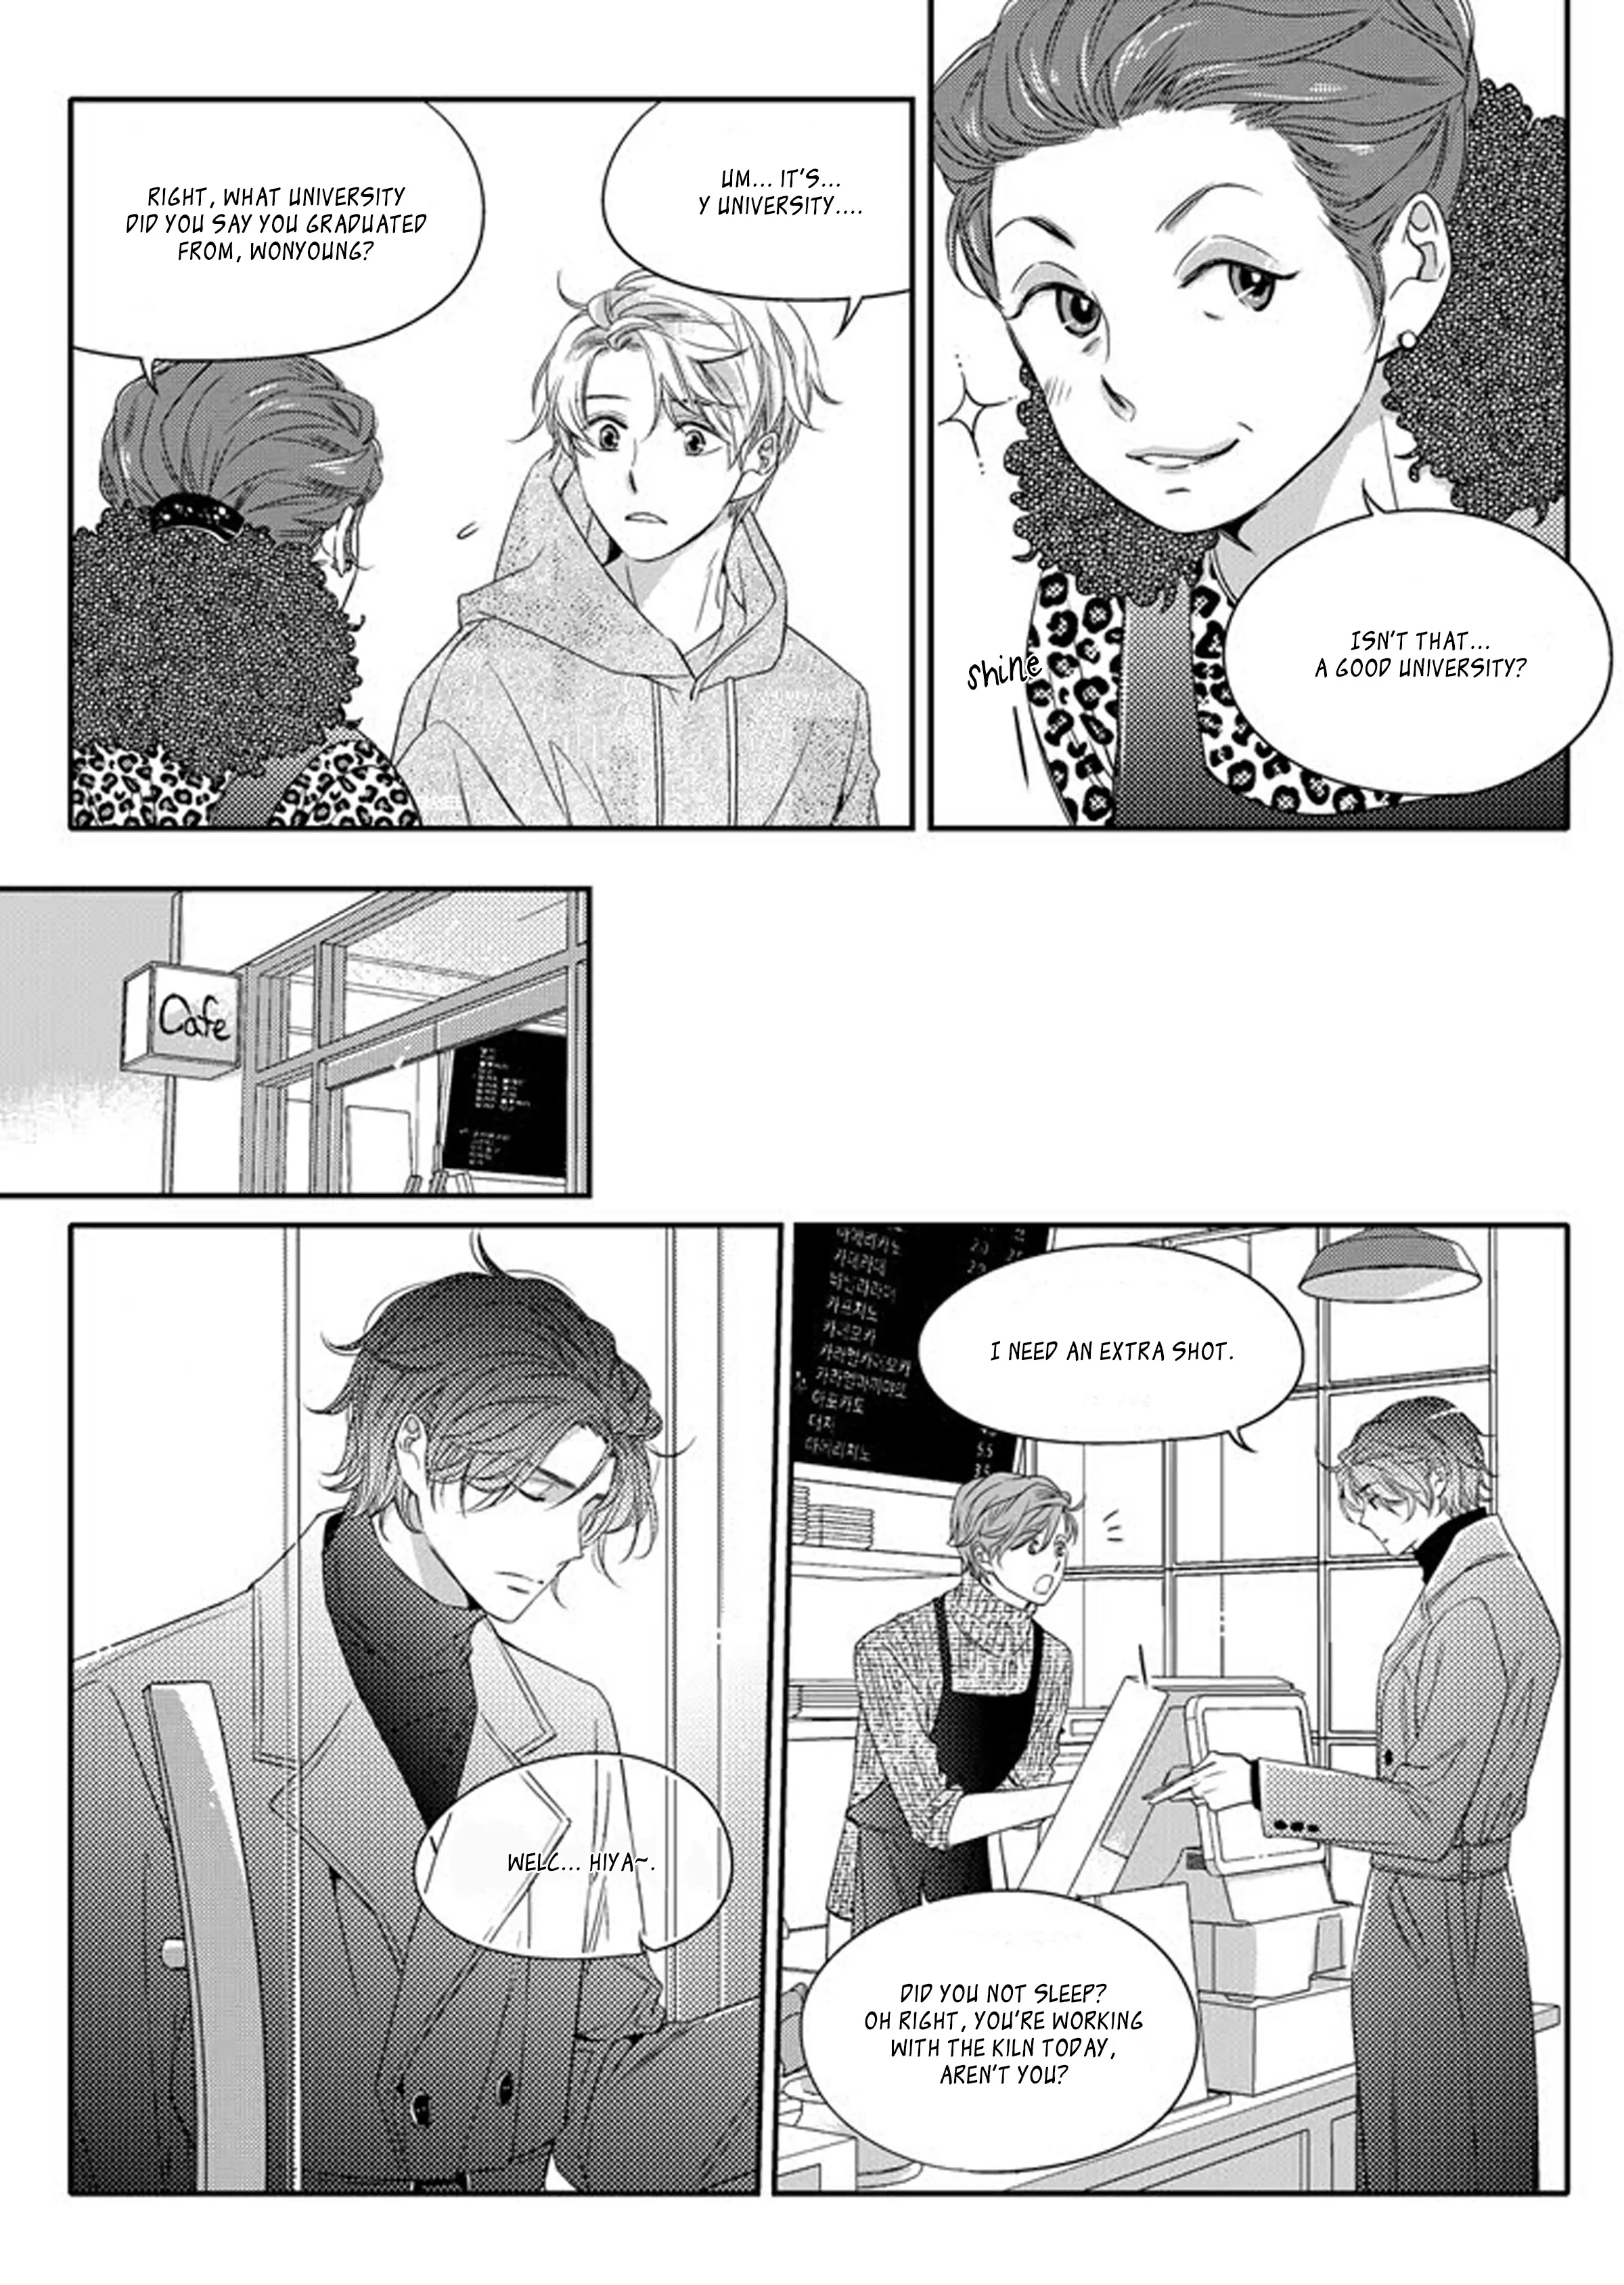 Unintentional Love Story - 7 page 13